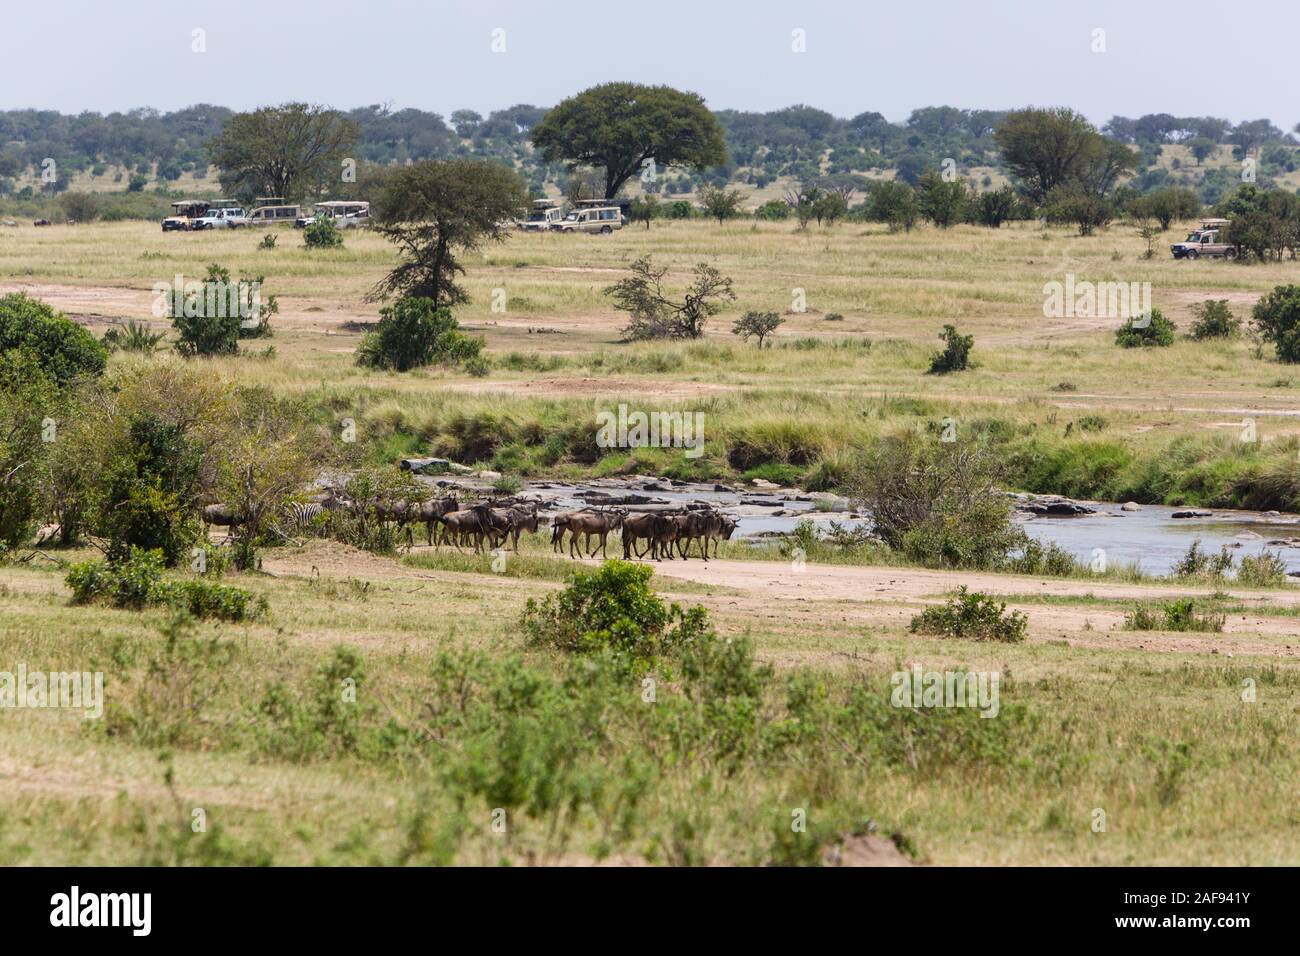 Tanzania. Serengeti. Vehicles Lined up to Watch Wildebeest Crossing of the Mara River on their Northward Migration. Stock Photo